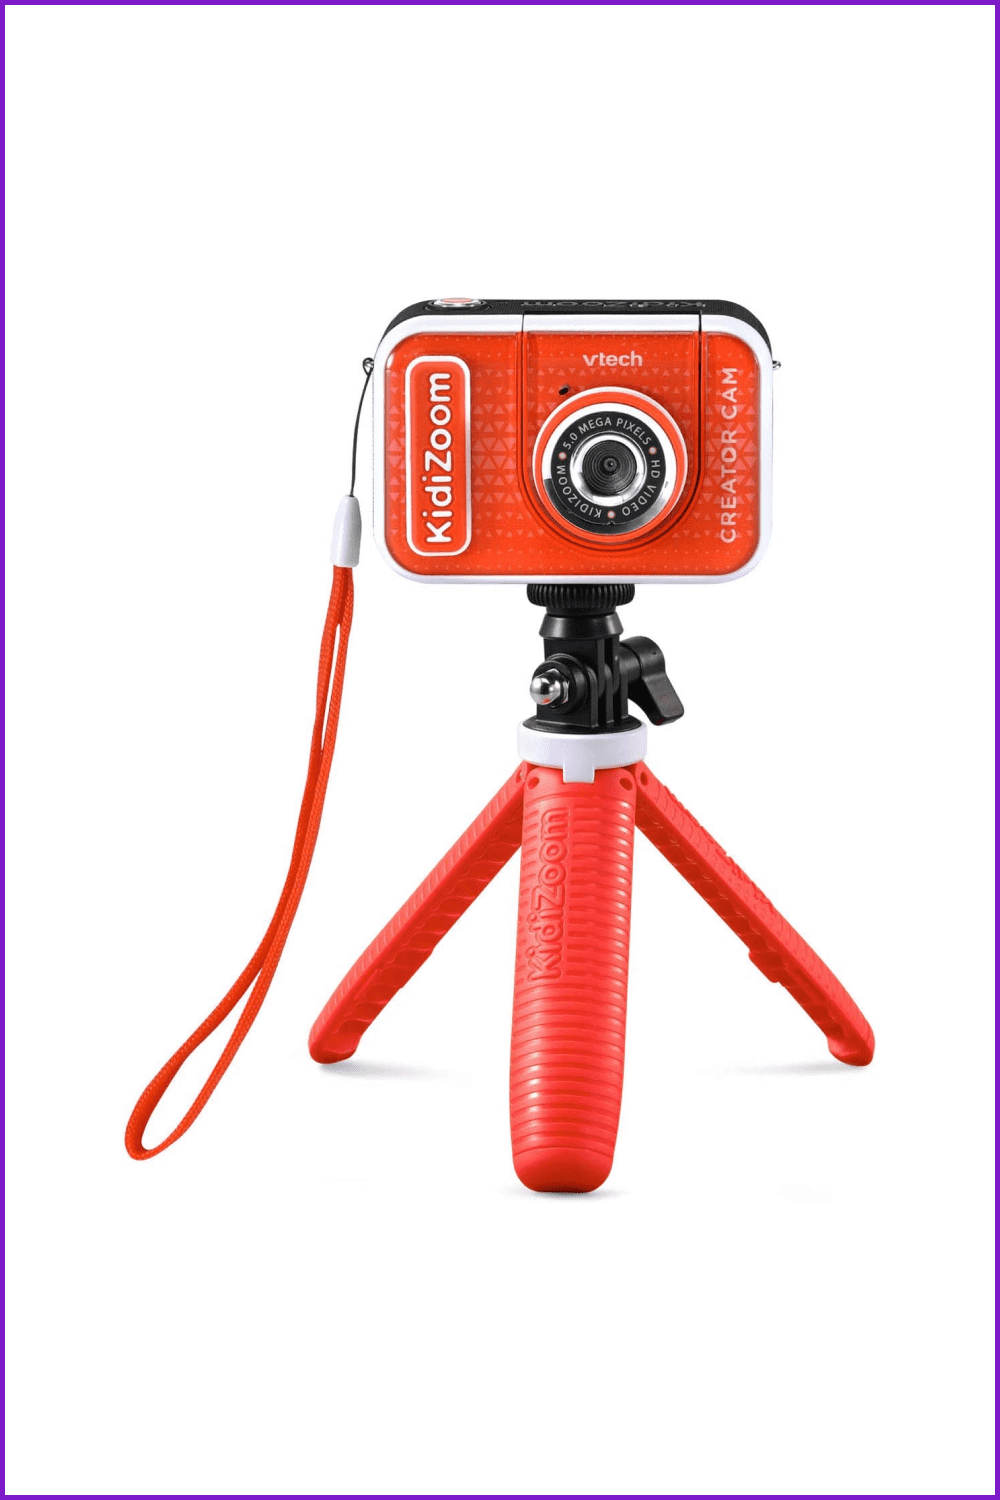 Photo of a red small camera on red tripod.